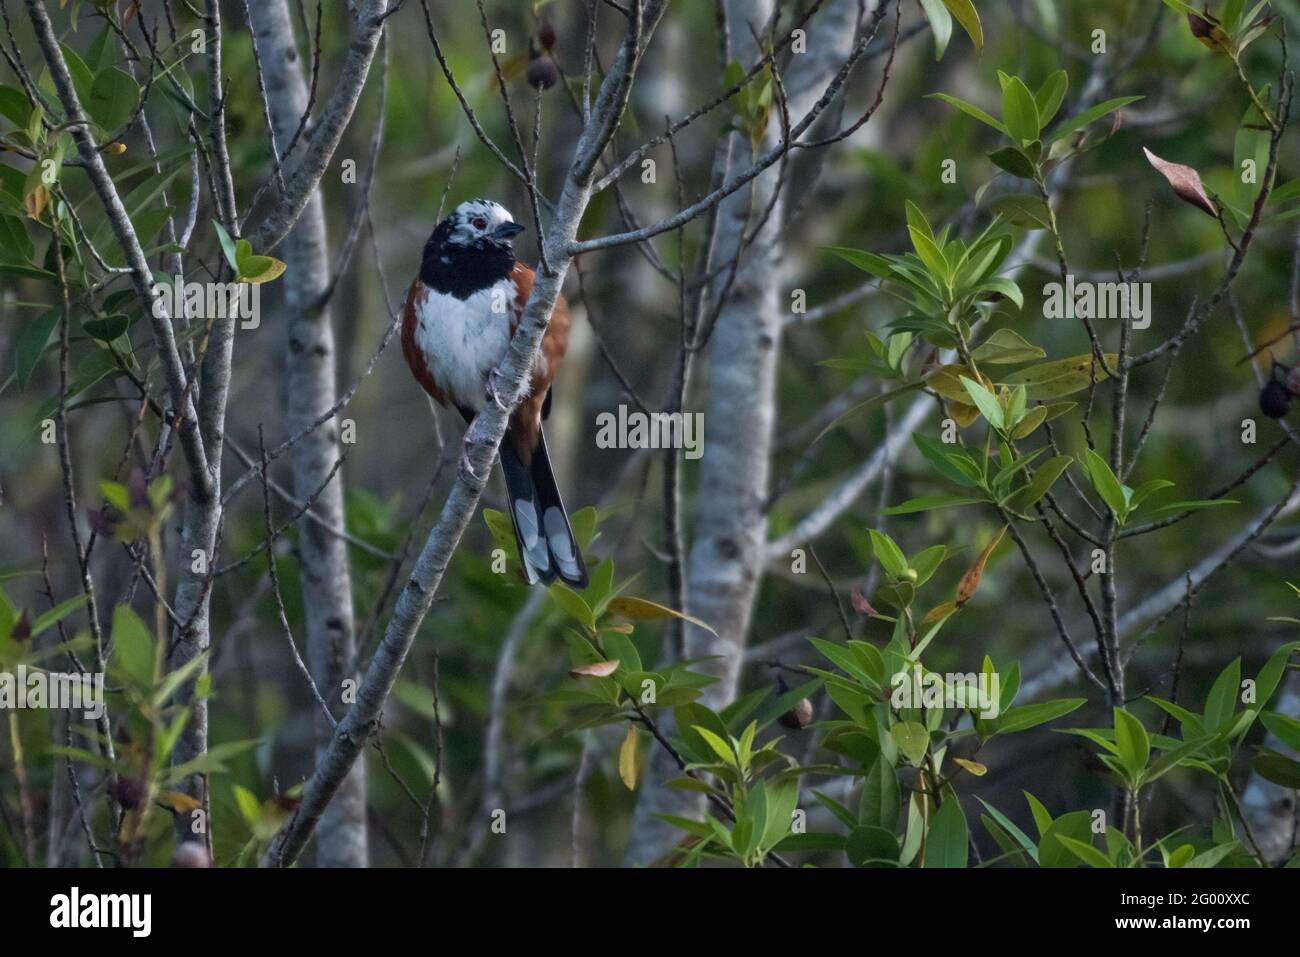 Leucistic spotted towhee bird (Pipilo maculatus), with unusually white feathers on its head. Its leucism is characterized by partial loss of pigment. Stock Photo